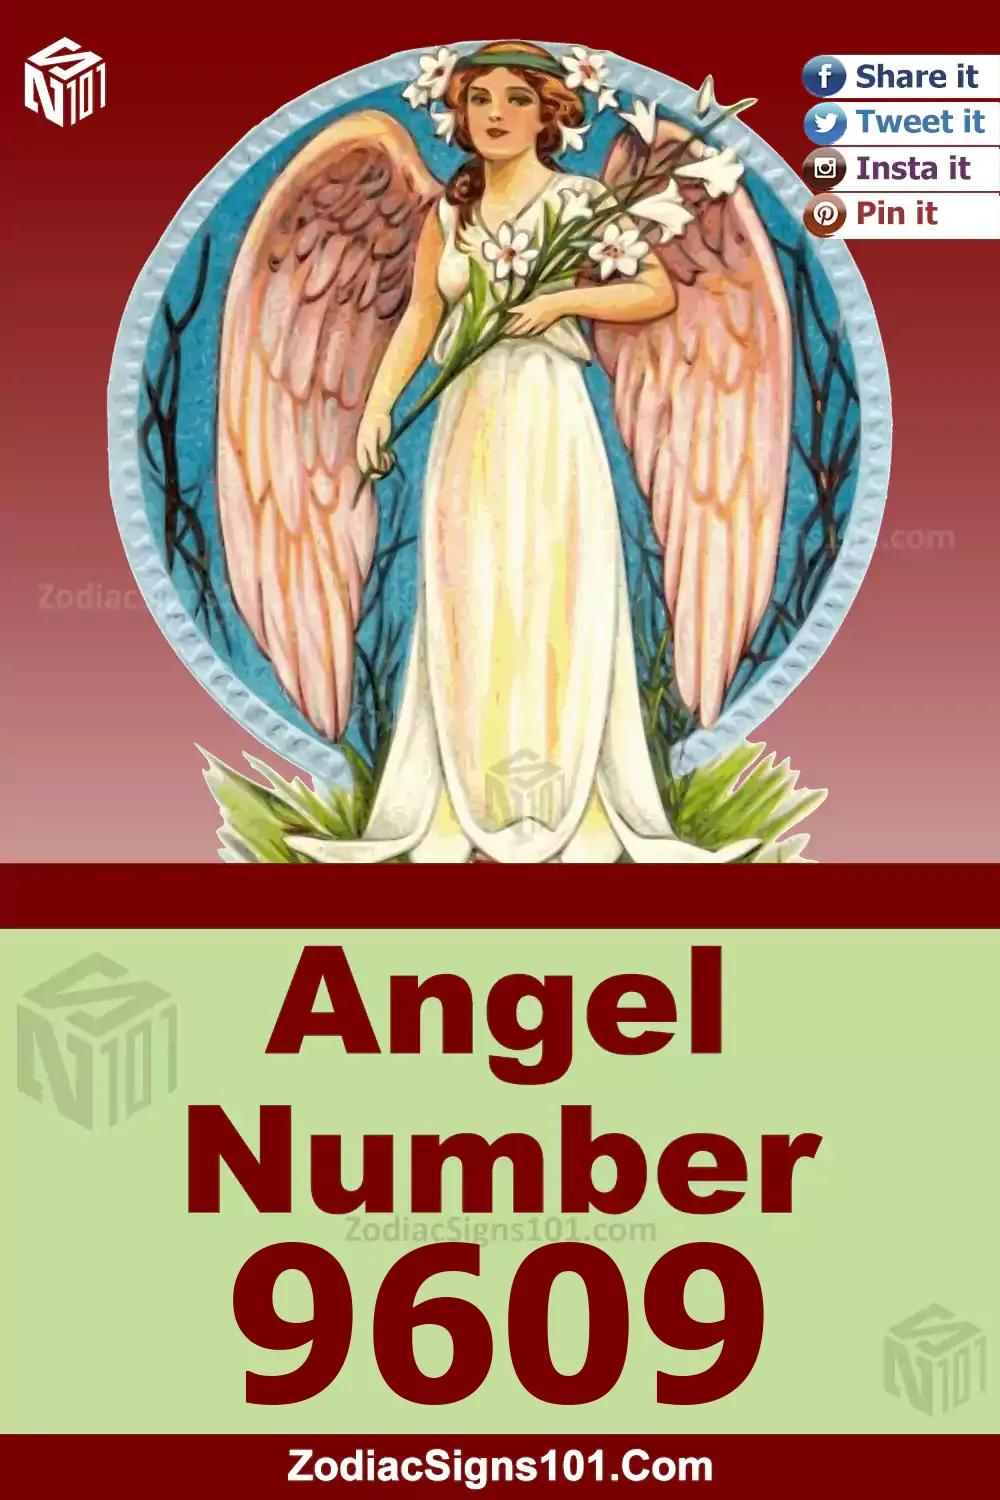 9609 Angel Number Meaning